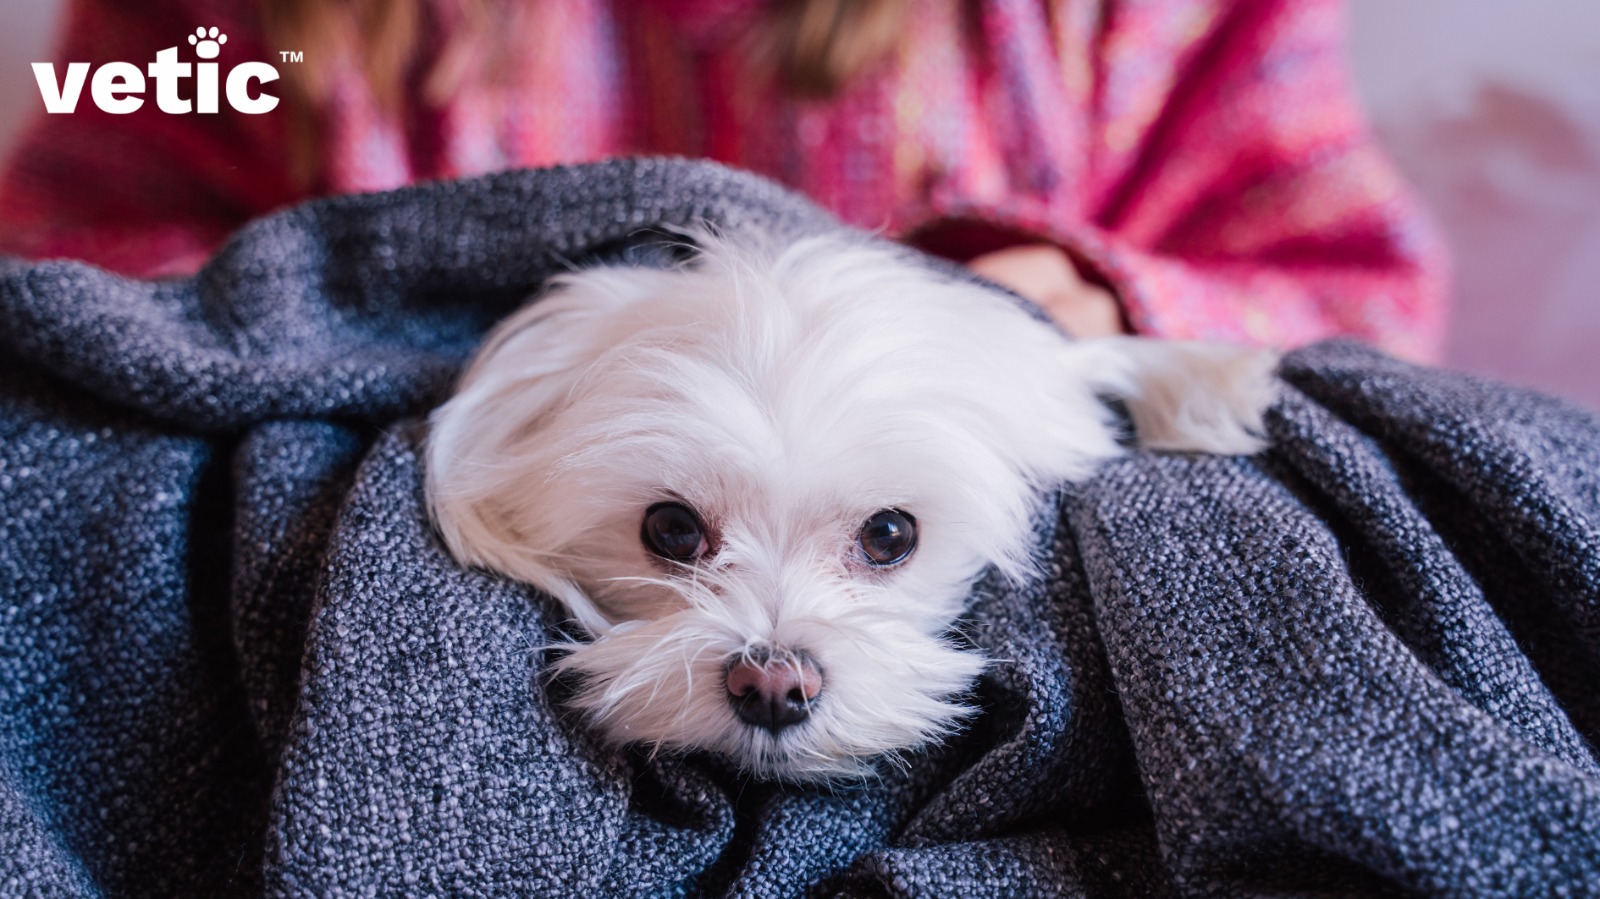 Tiny Maltese pup sitting wrapped in a grey blanket with just the head out, looking right at the camera.